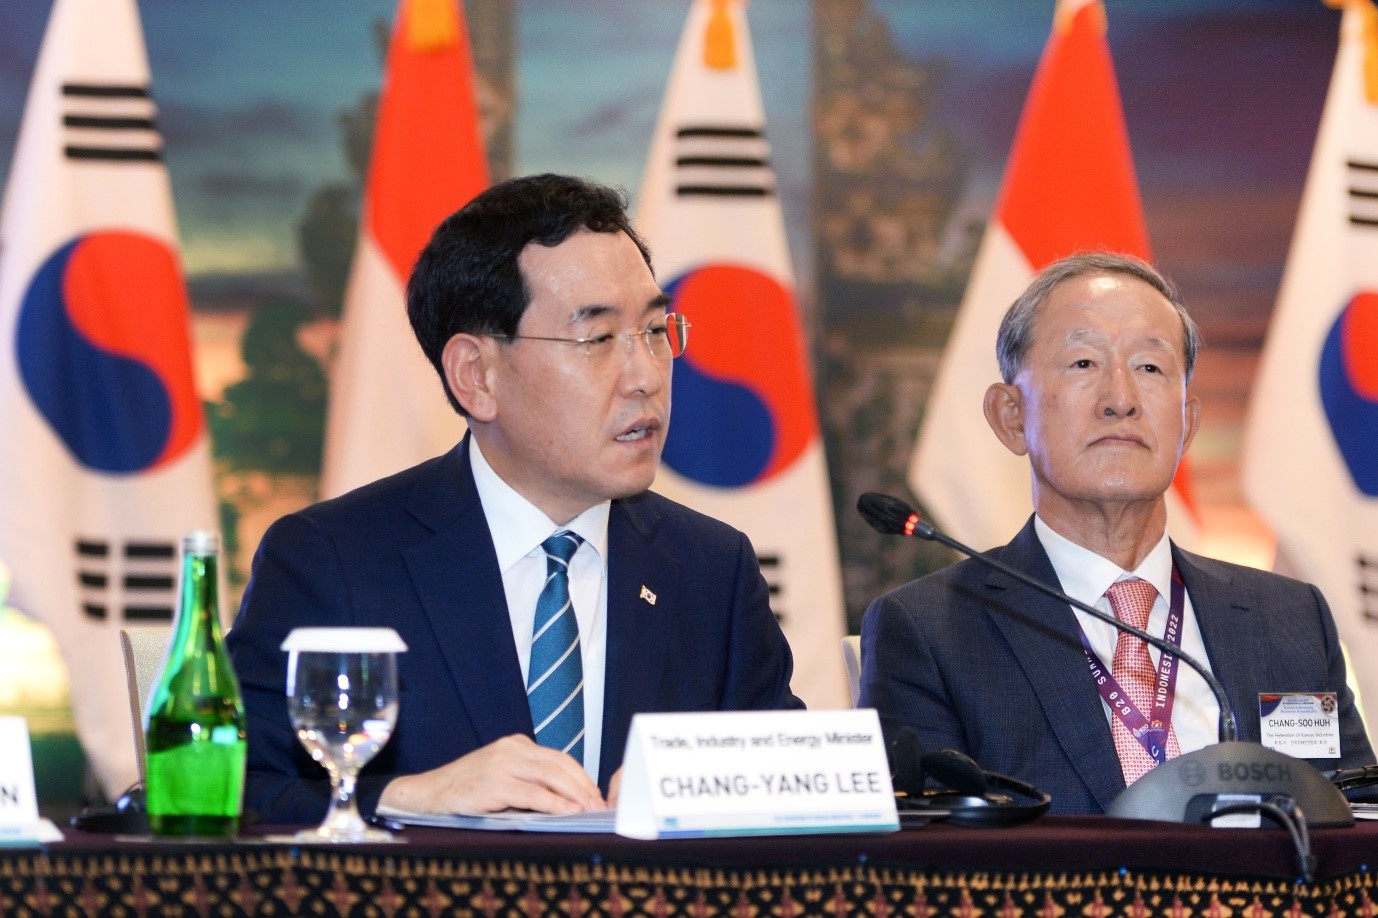 Minister attends Korea-Indonesia Business Roundtable on sidelines of G20 Image 0